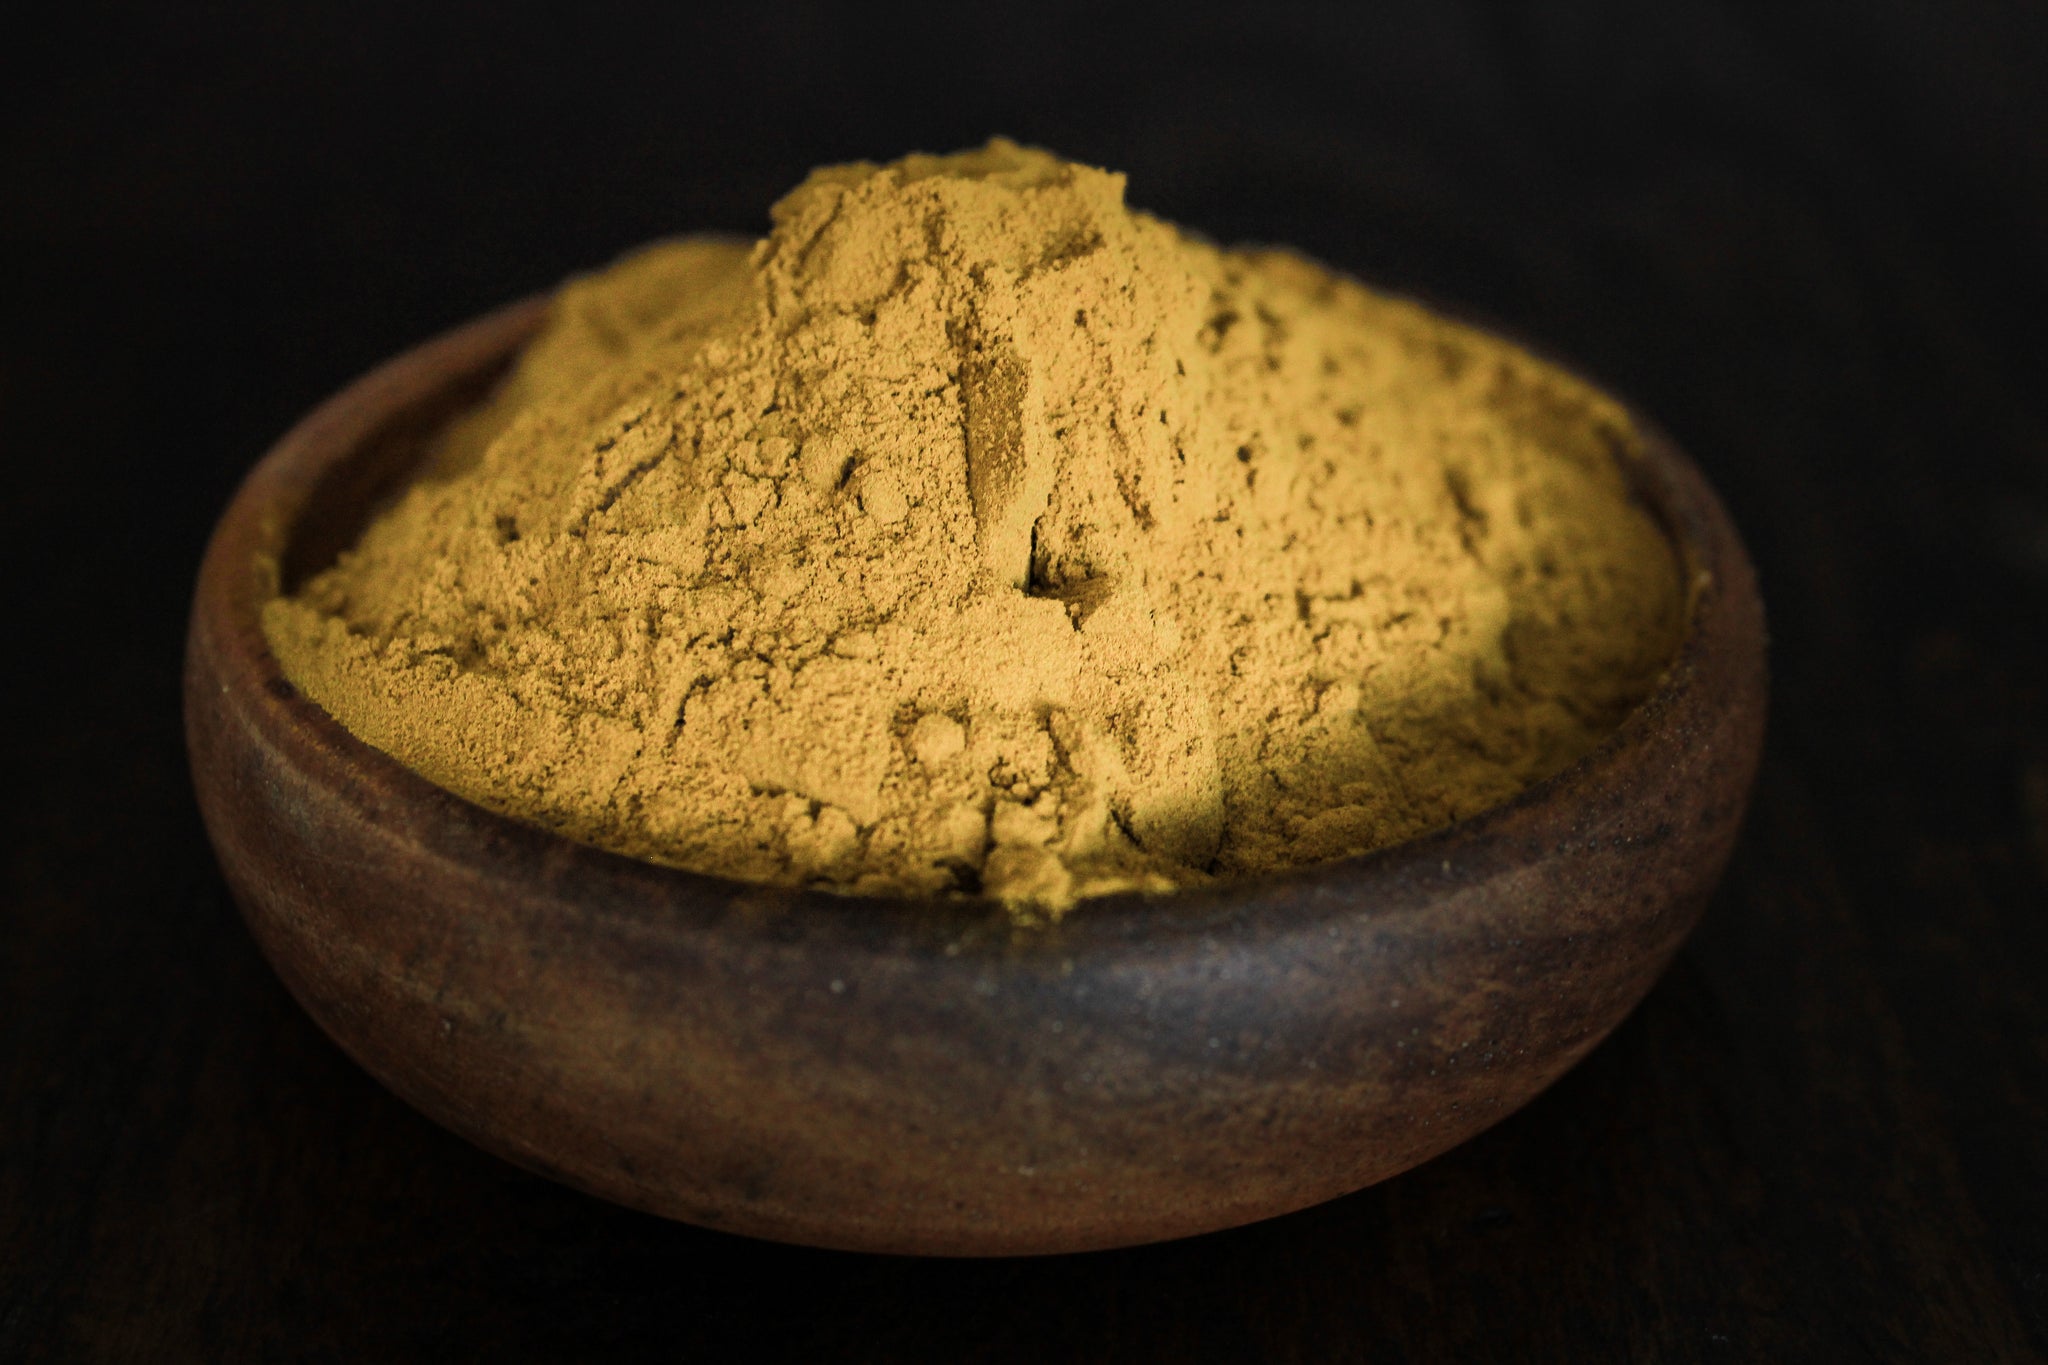 Fresh grinded yellow turmeric root powder shown in a wooden bowl